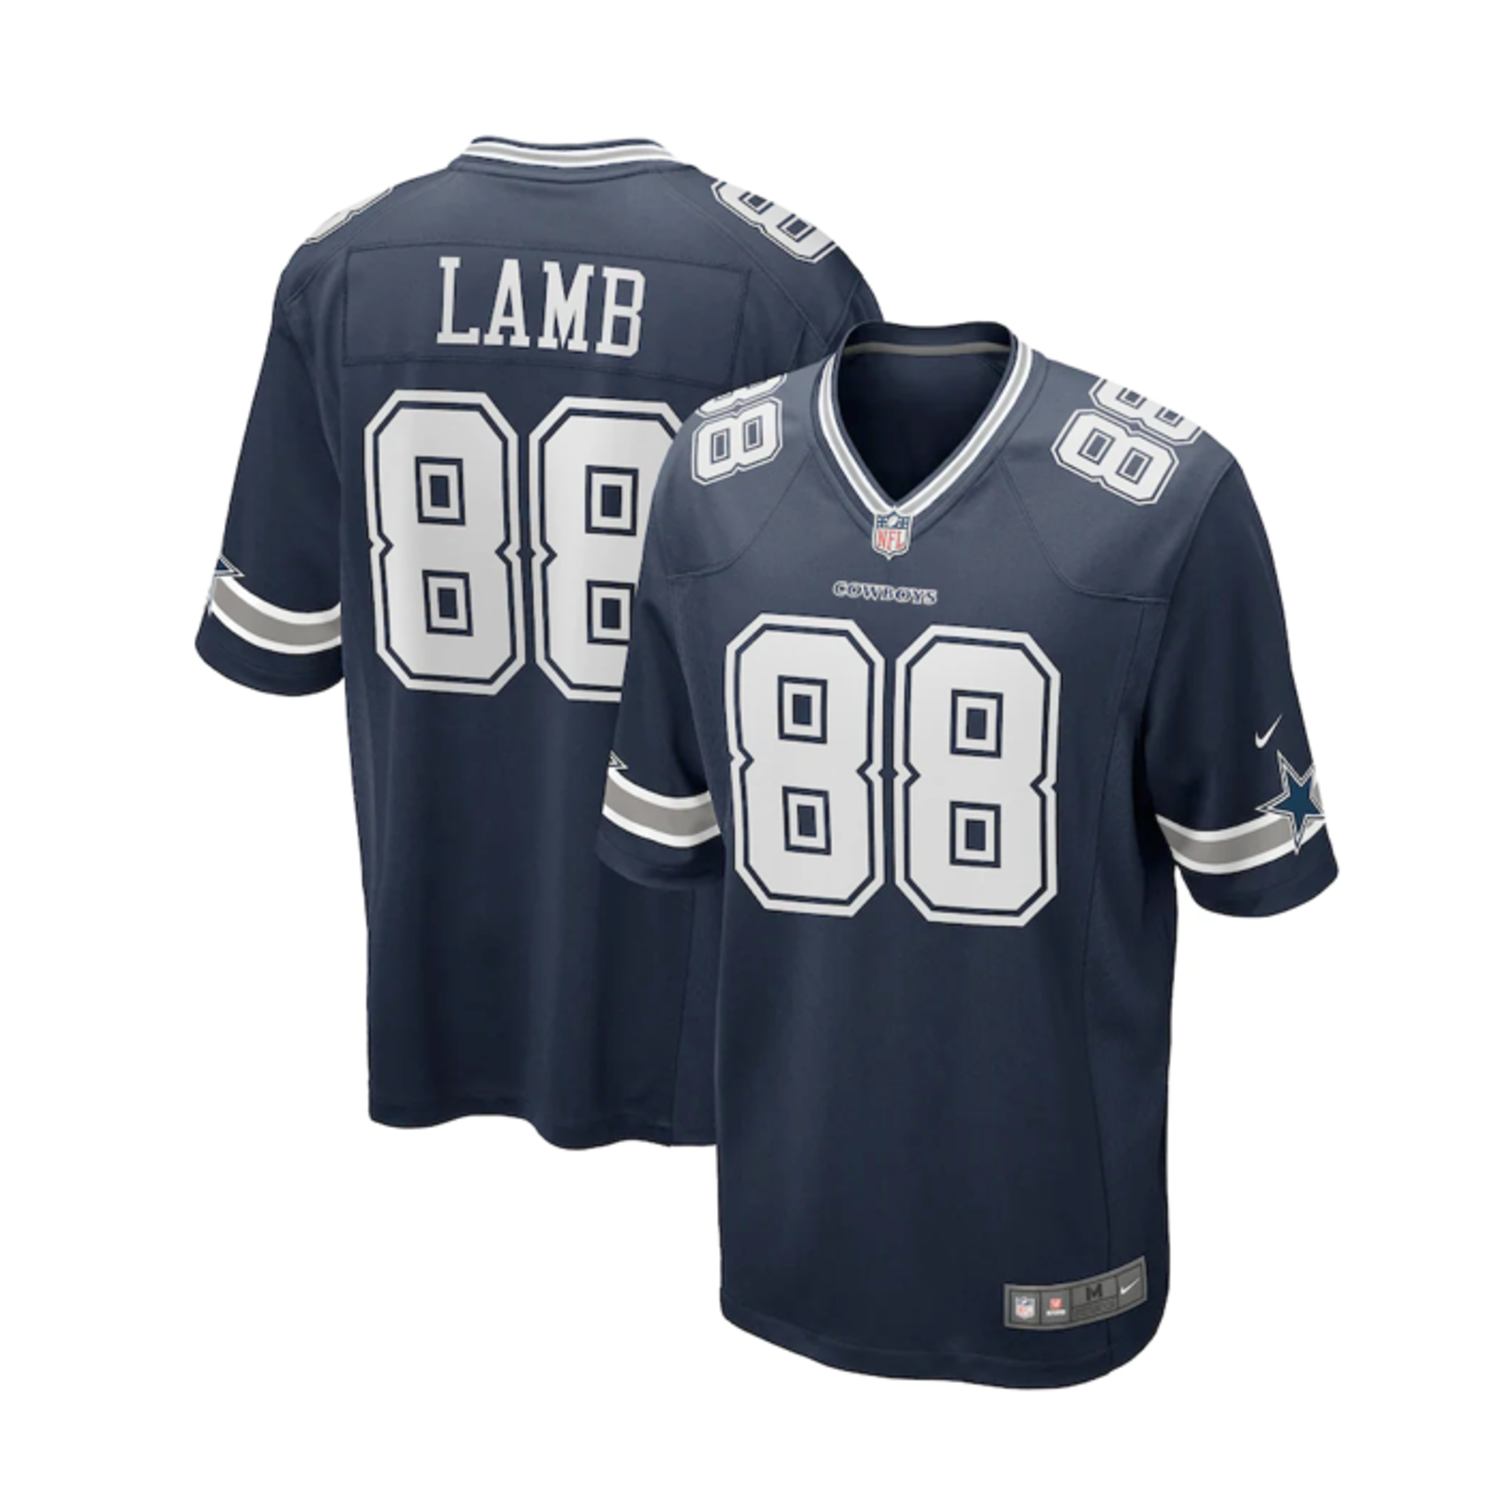 2017 DALLAS COWBOYS BRYANT #88 NIKE GAME JERSEY (HOME) L - *AS NEW*